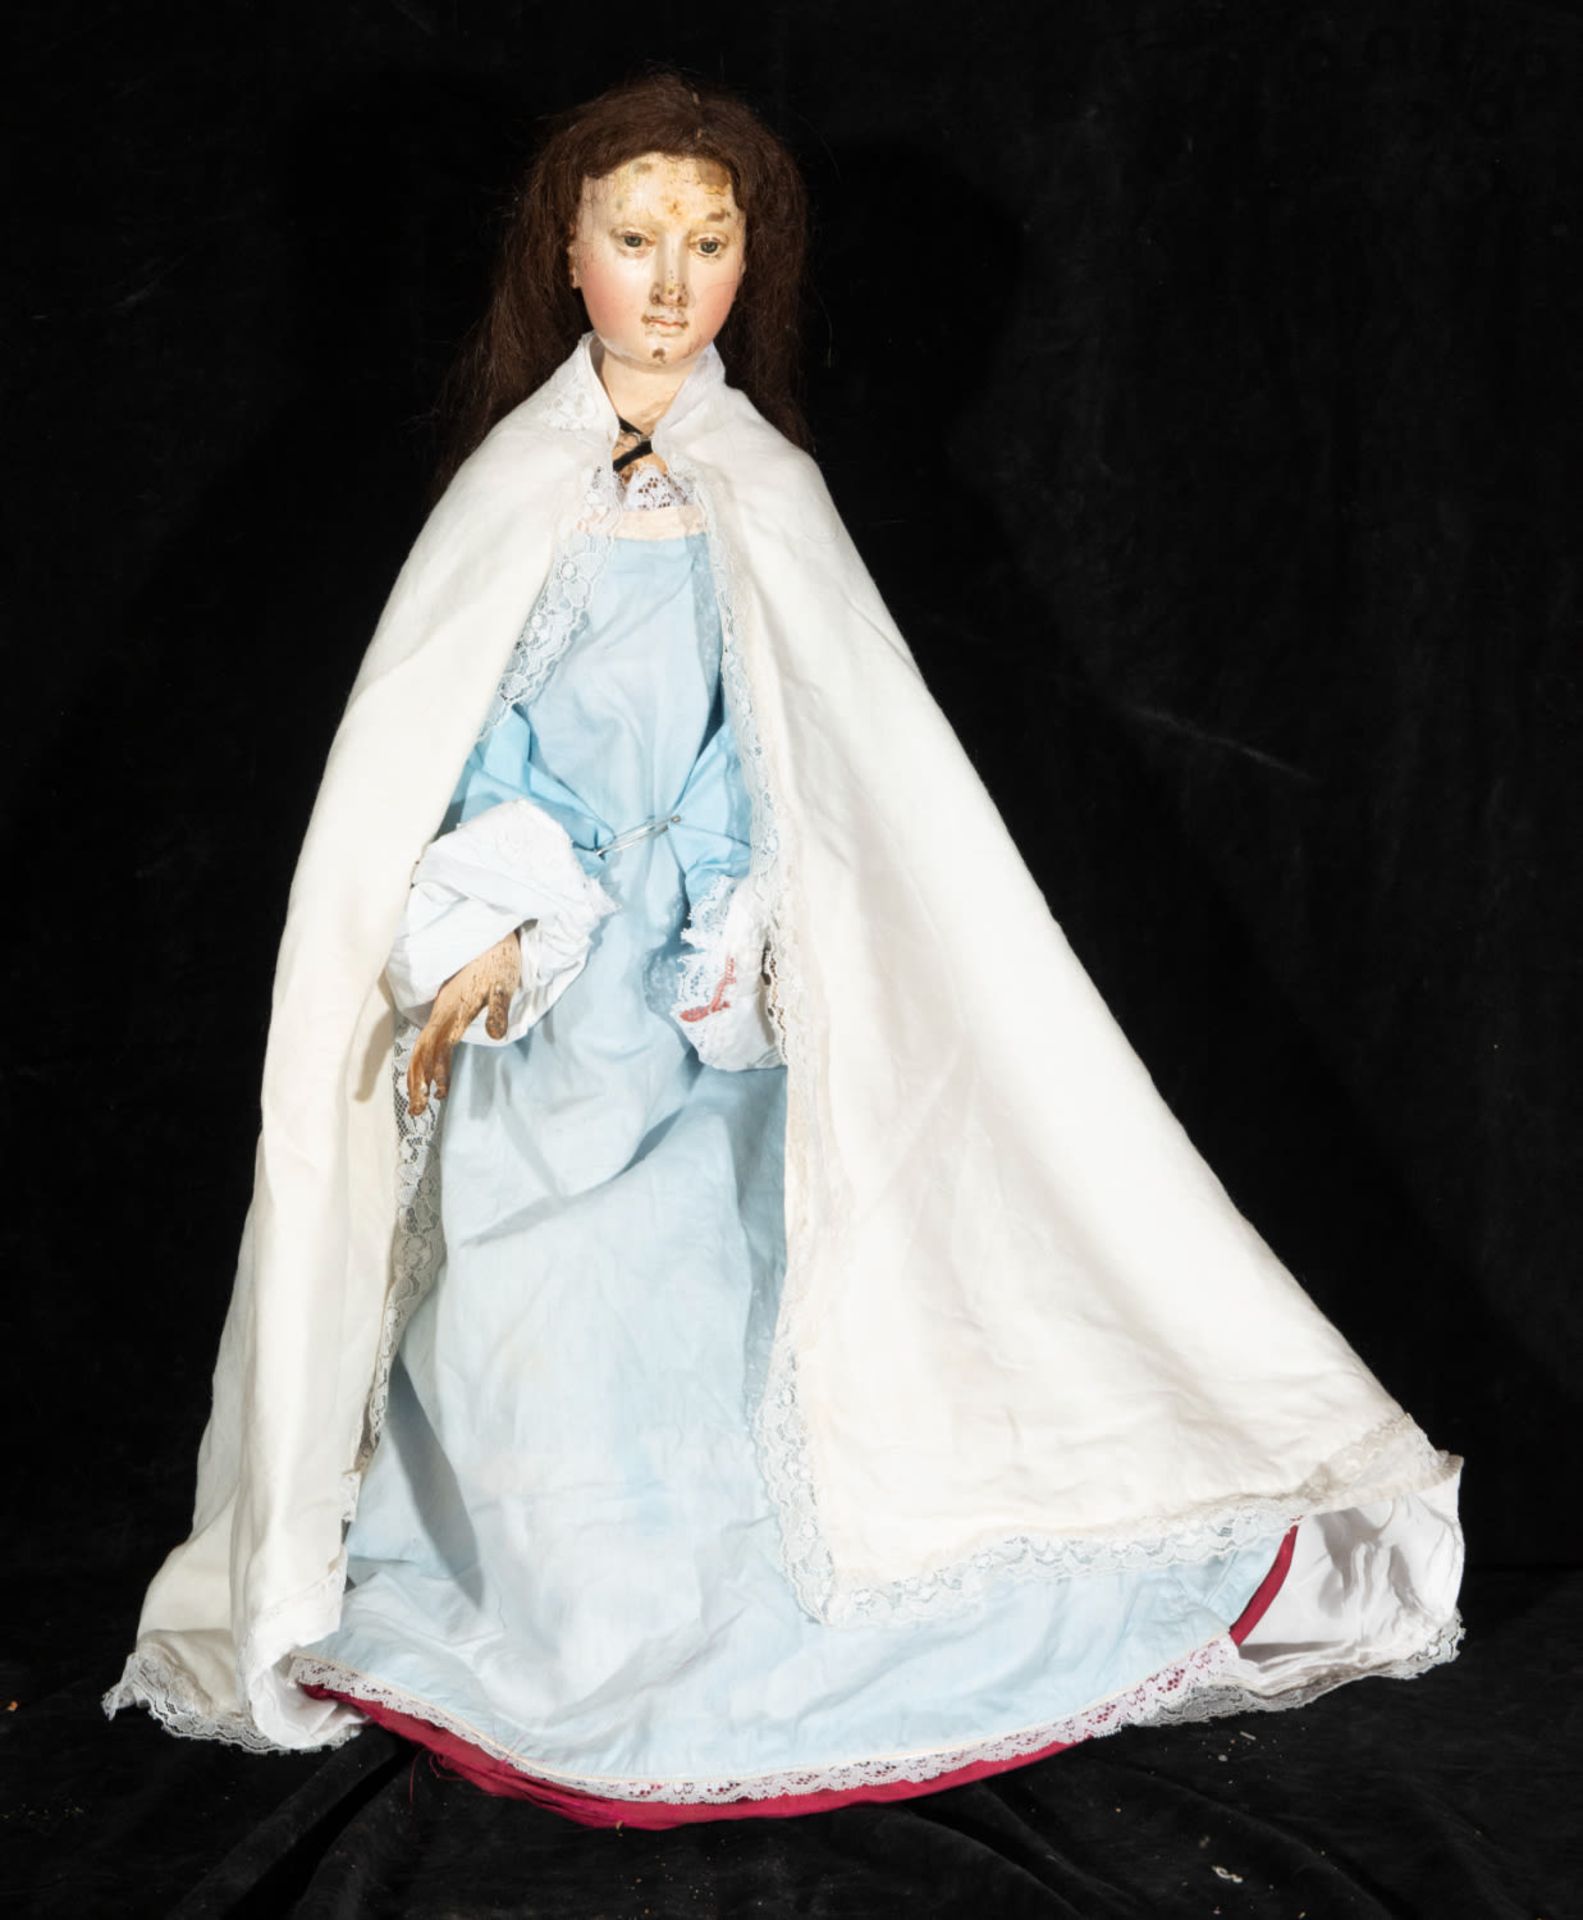 Sculpture of Virgin to dress, head and hands from the 18th century